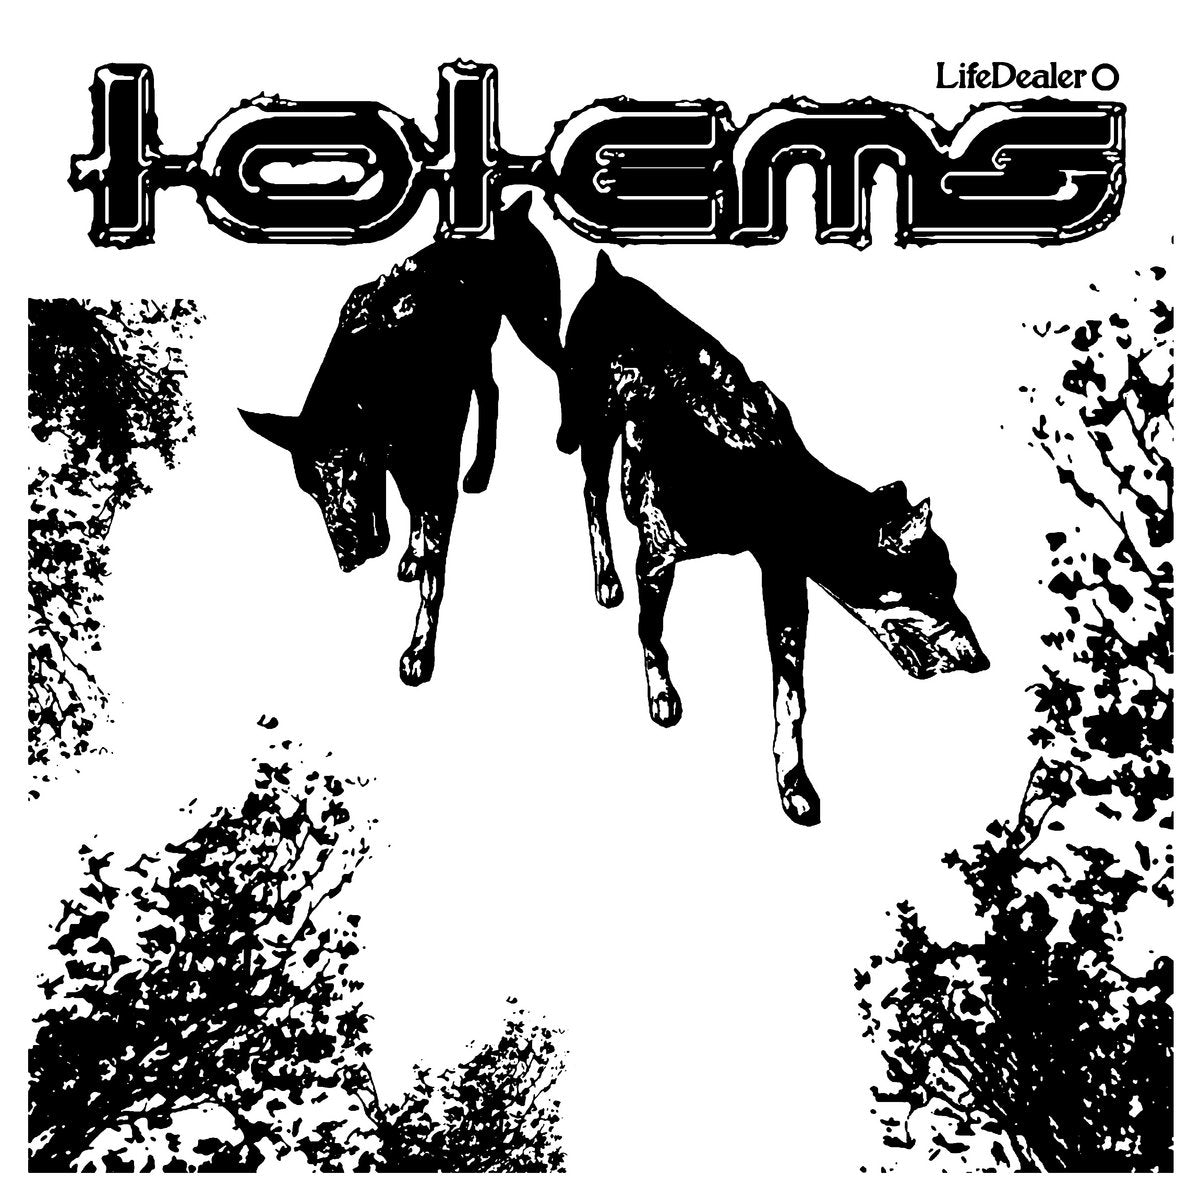 Totems - Life Dealer/devilman69 | Buy the LP from Flying Nun Records